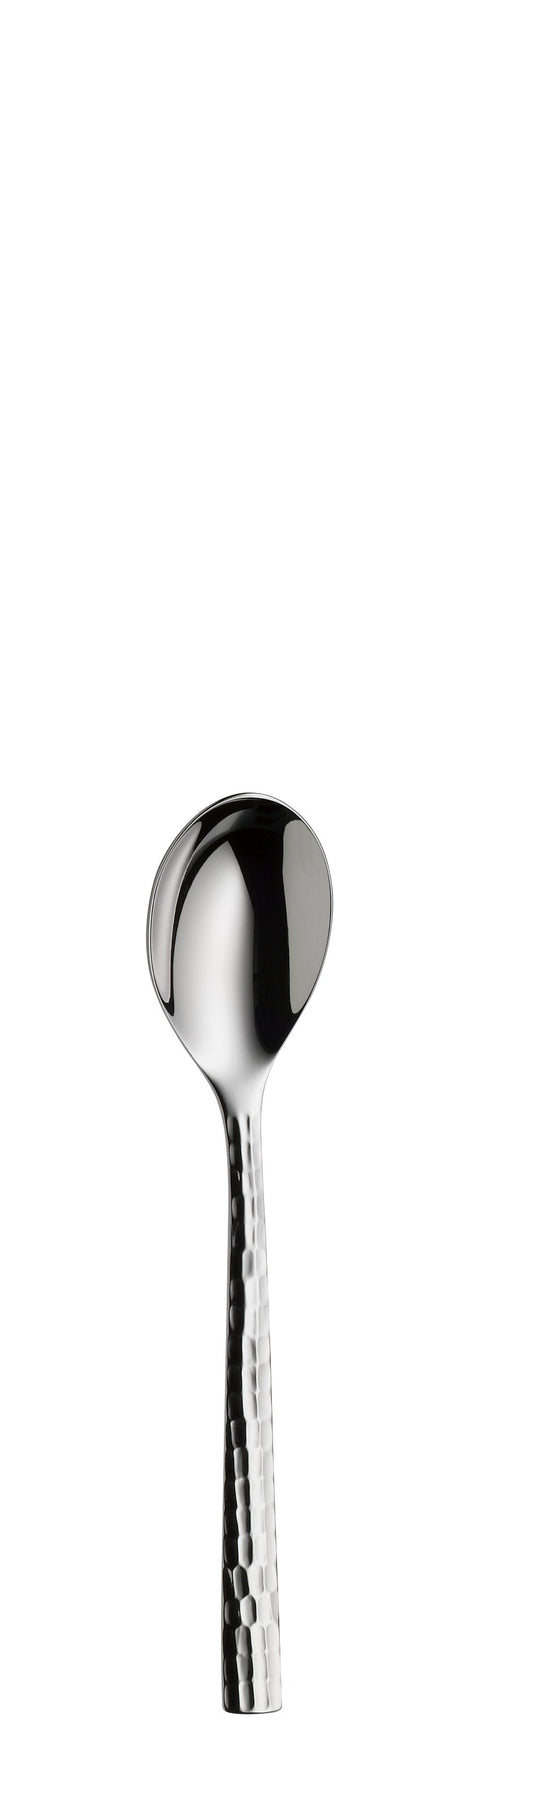 Coffee spoon LENISTA silverplated 137mm